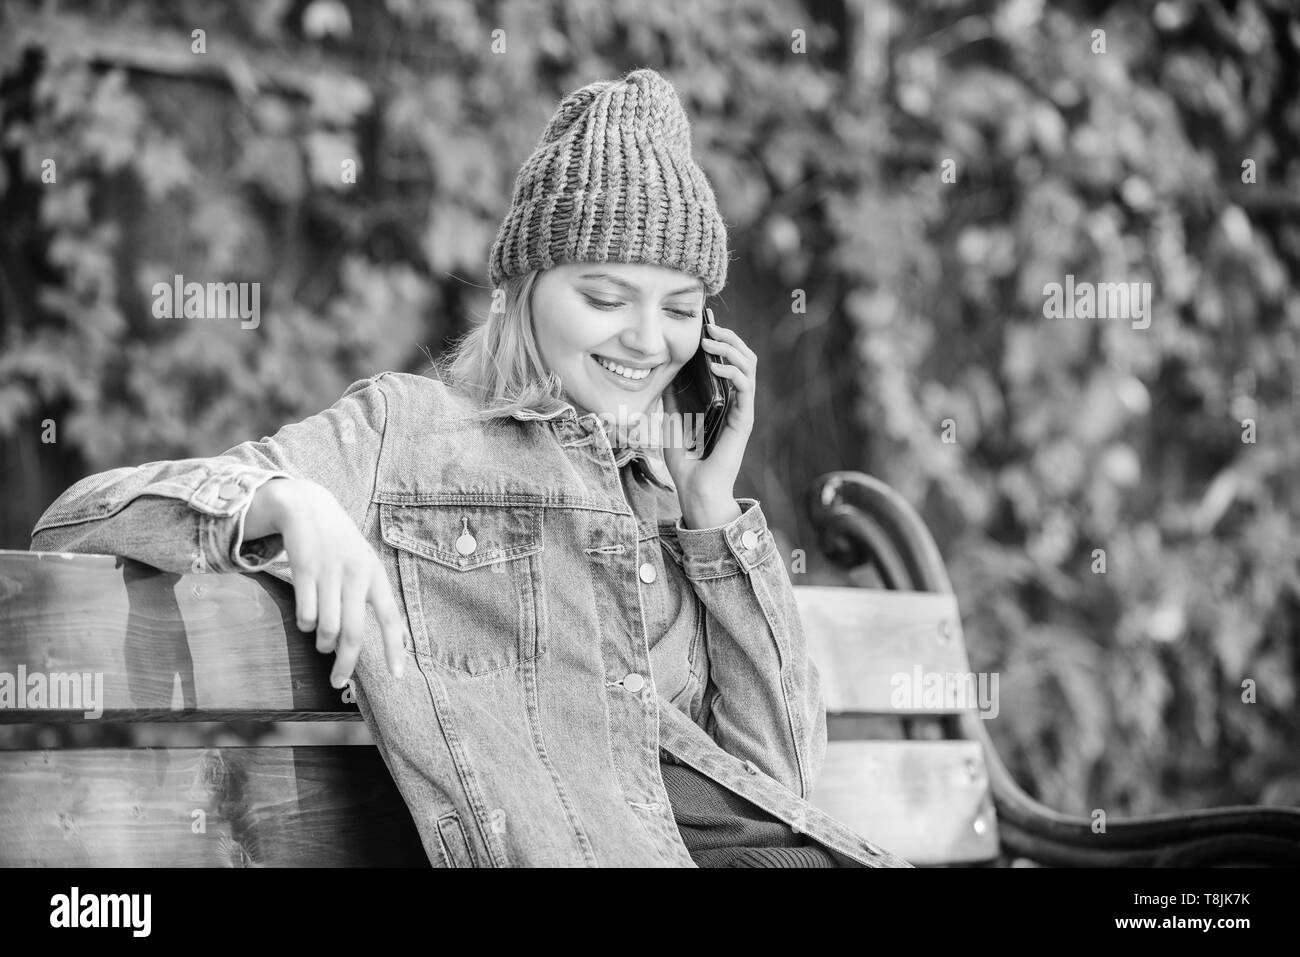 Girl busy with smartphone green nature background. Woman having mobile conversation. Girl smartphone call friend. Stay touch with modern smartphone. Mobile call concept. I am waiting for you in park. Stock Photo